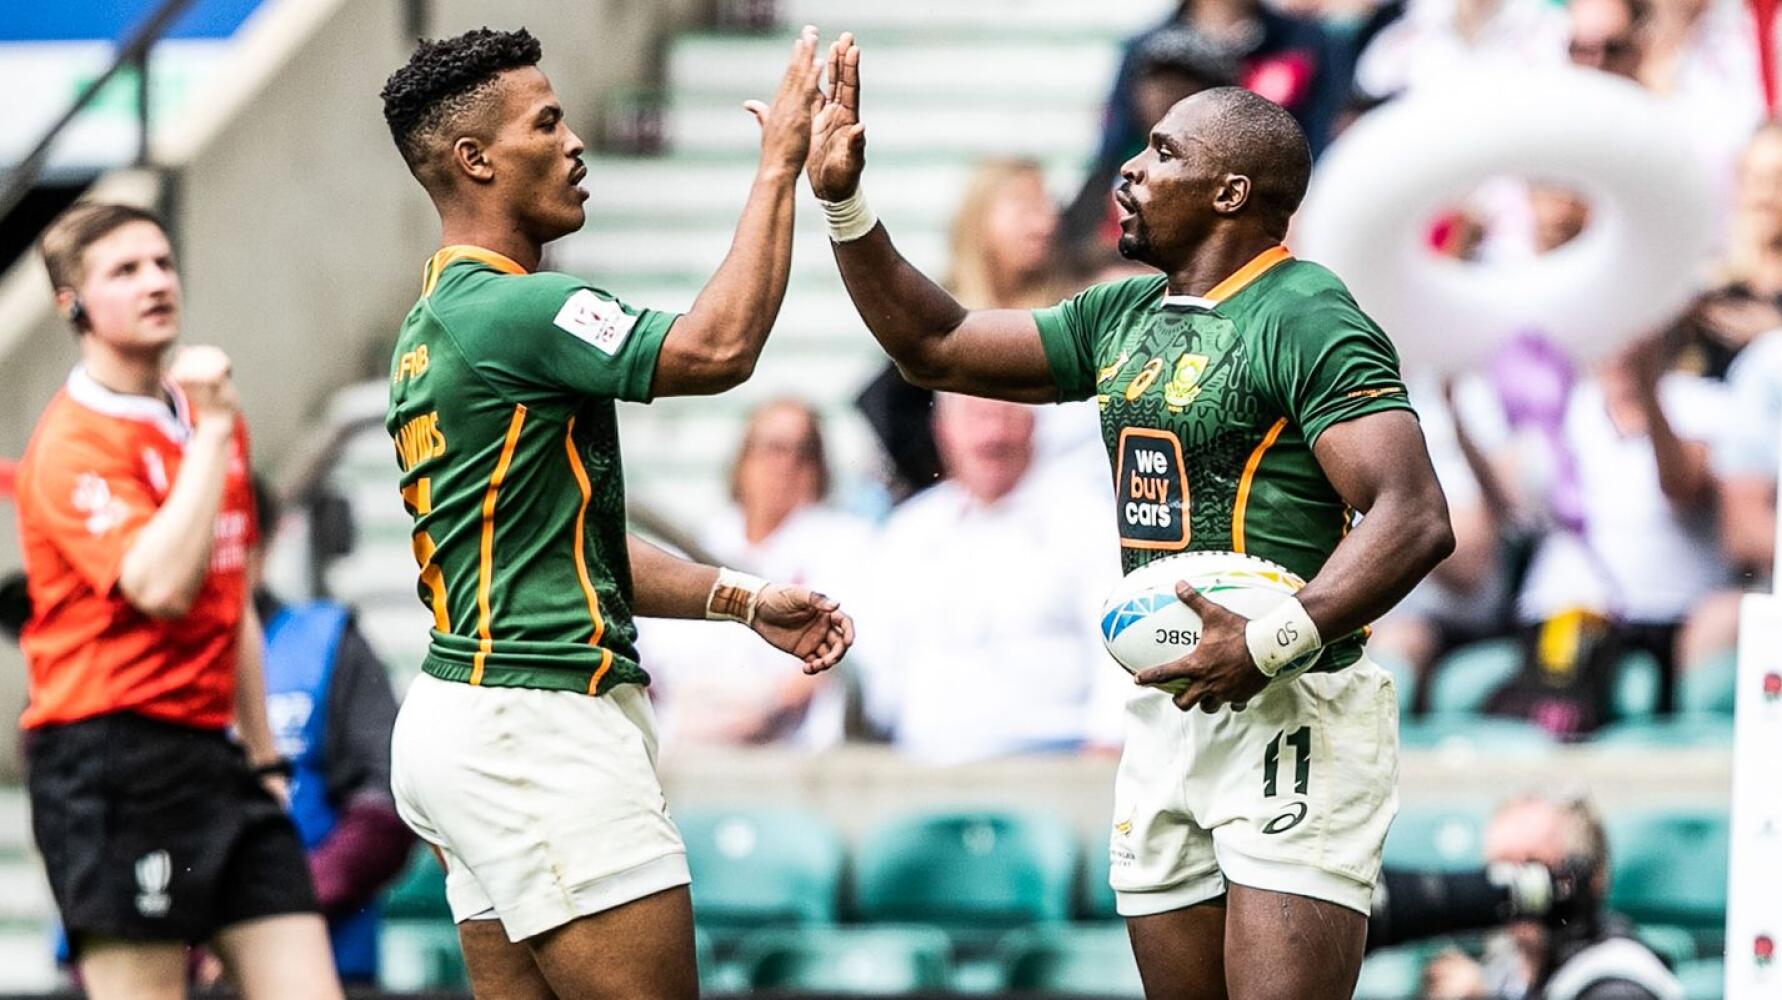 The Blitzboks have until August and the last World Sevens Series event in Los Angeles to rue the golden chance they had in London to clinch the Sevens Series title